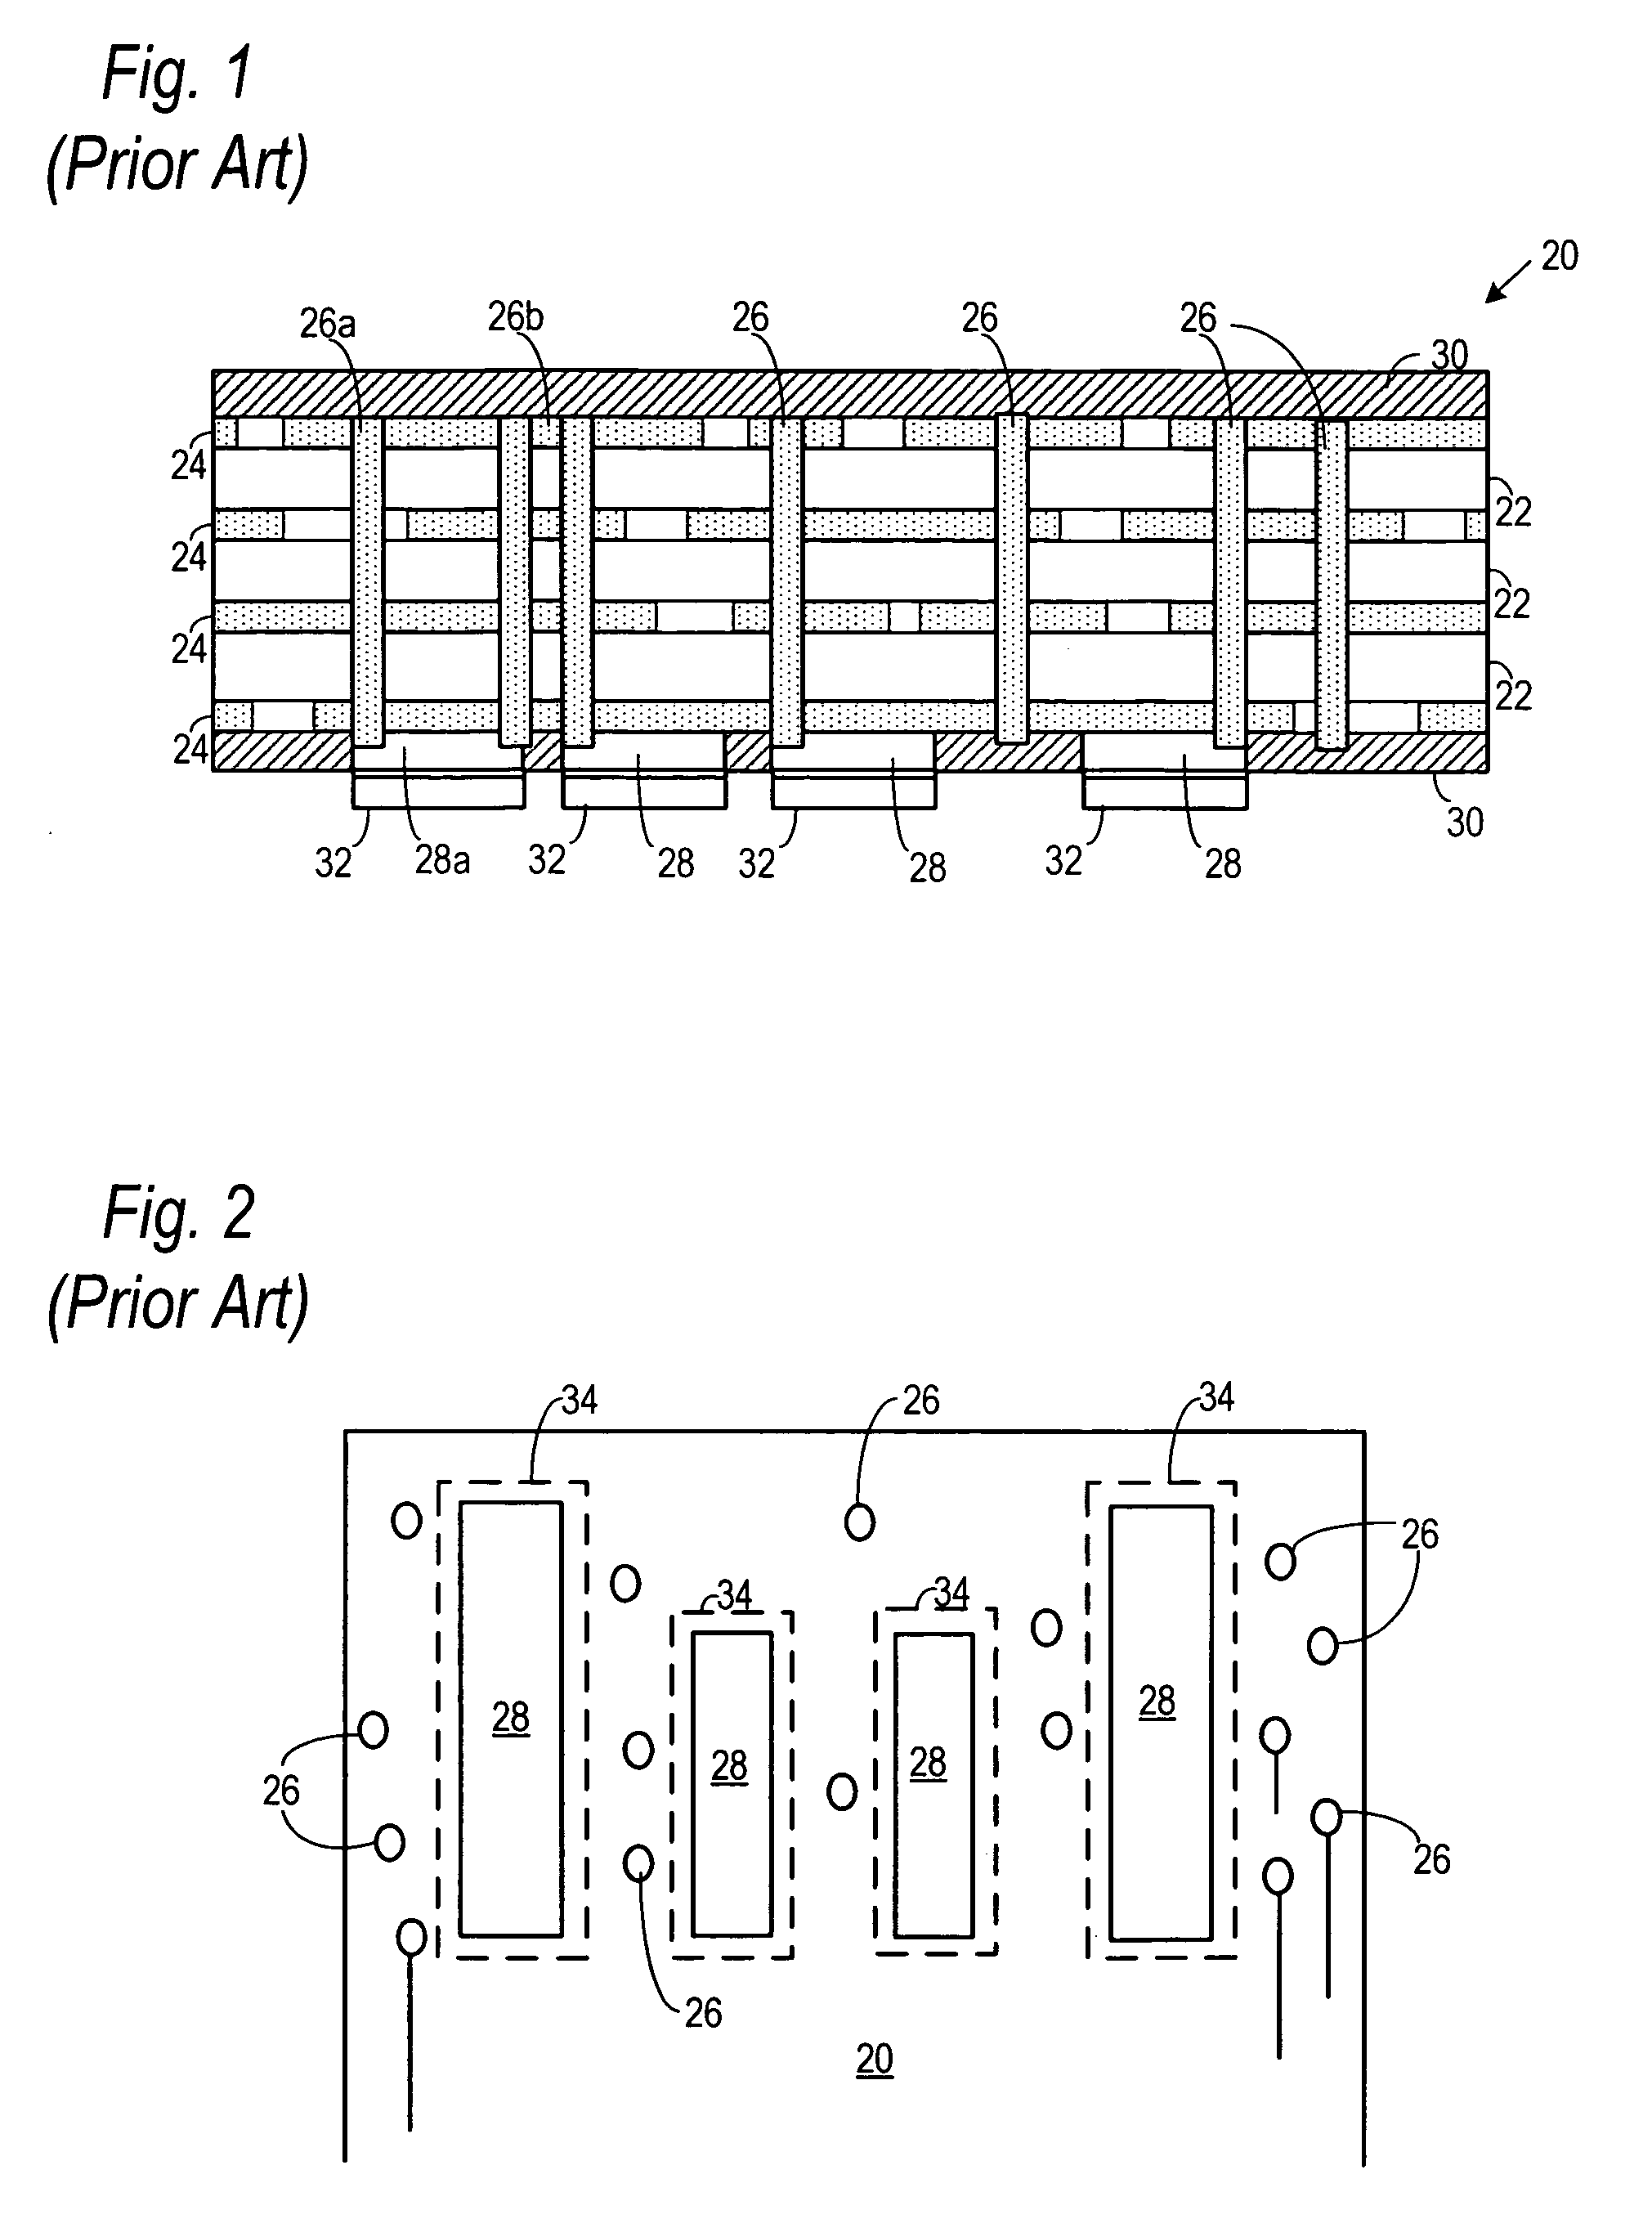 Printed circuit board with coextensive electrical connectors and contact pad areas